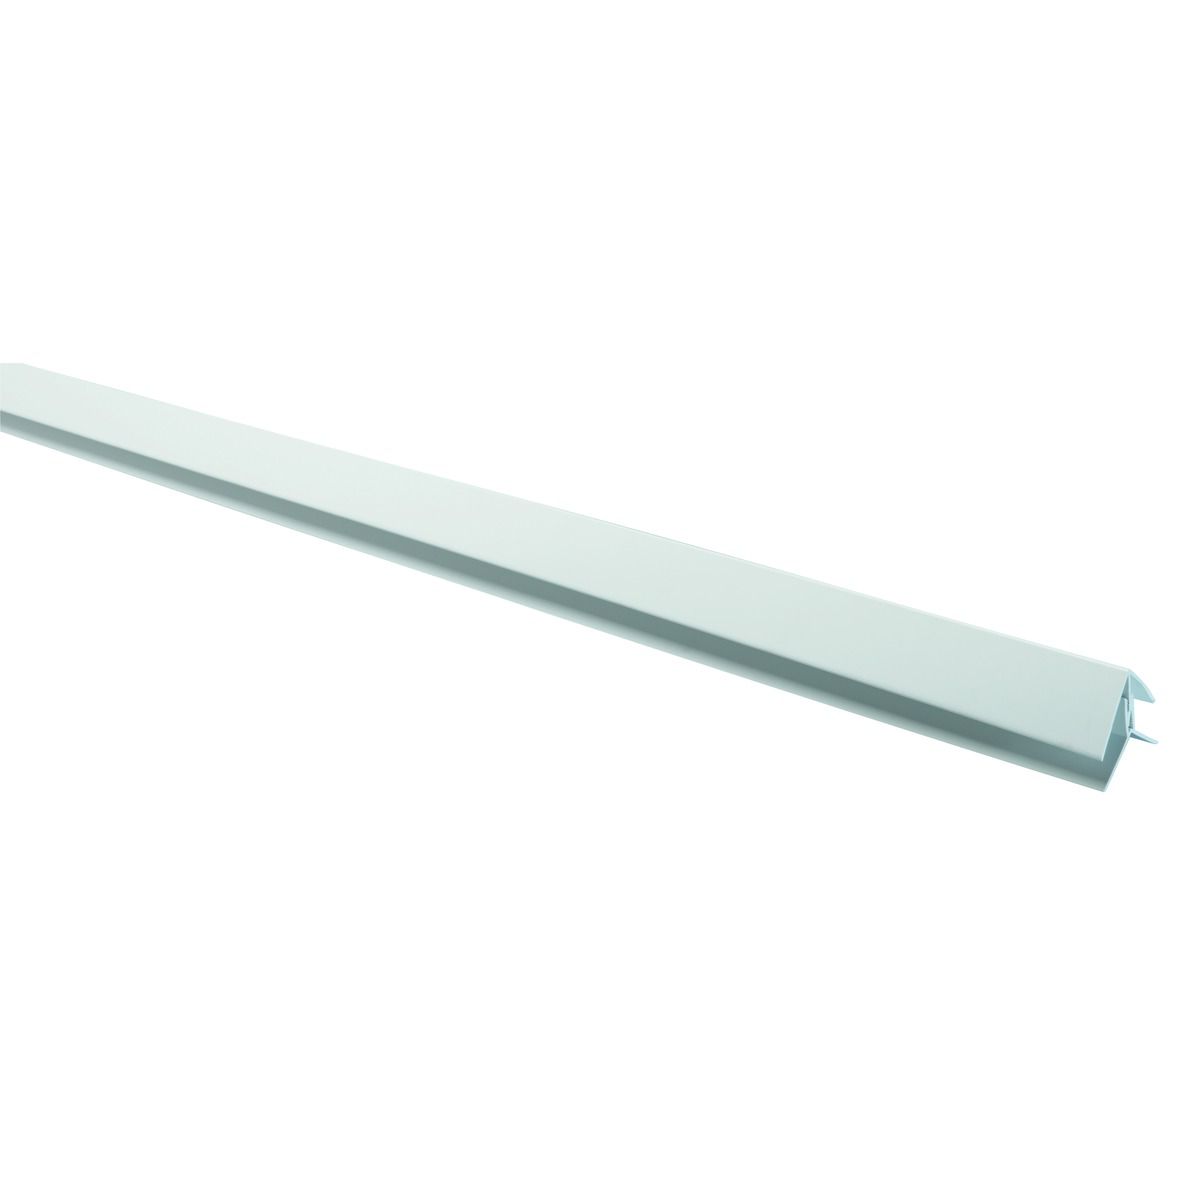 Image of Wickes PVCu External Angled Cladding Trim - White 2.5m